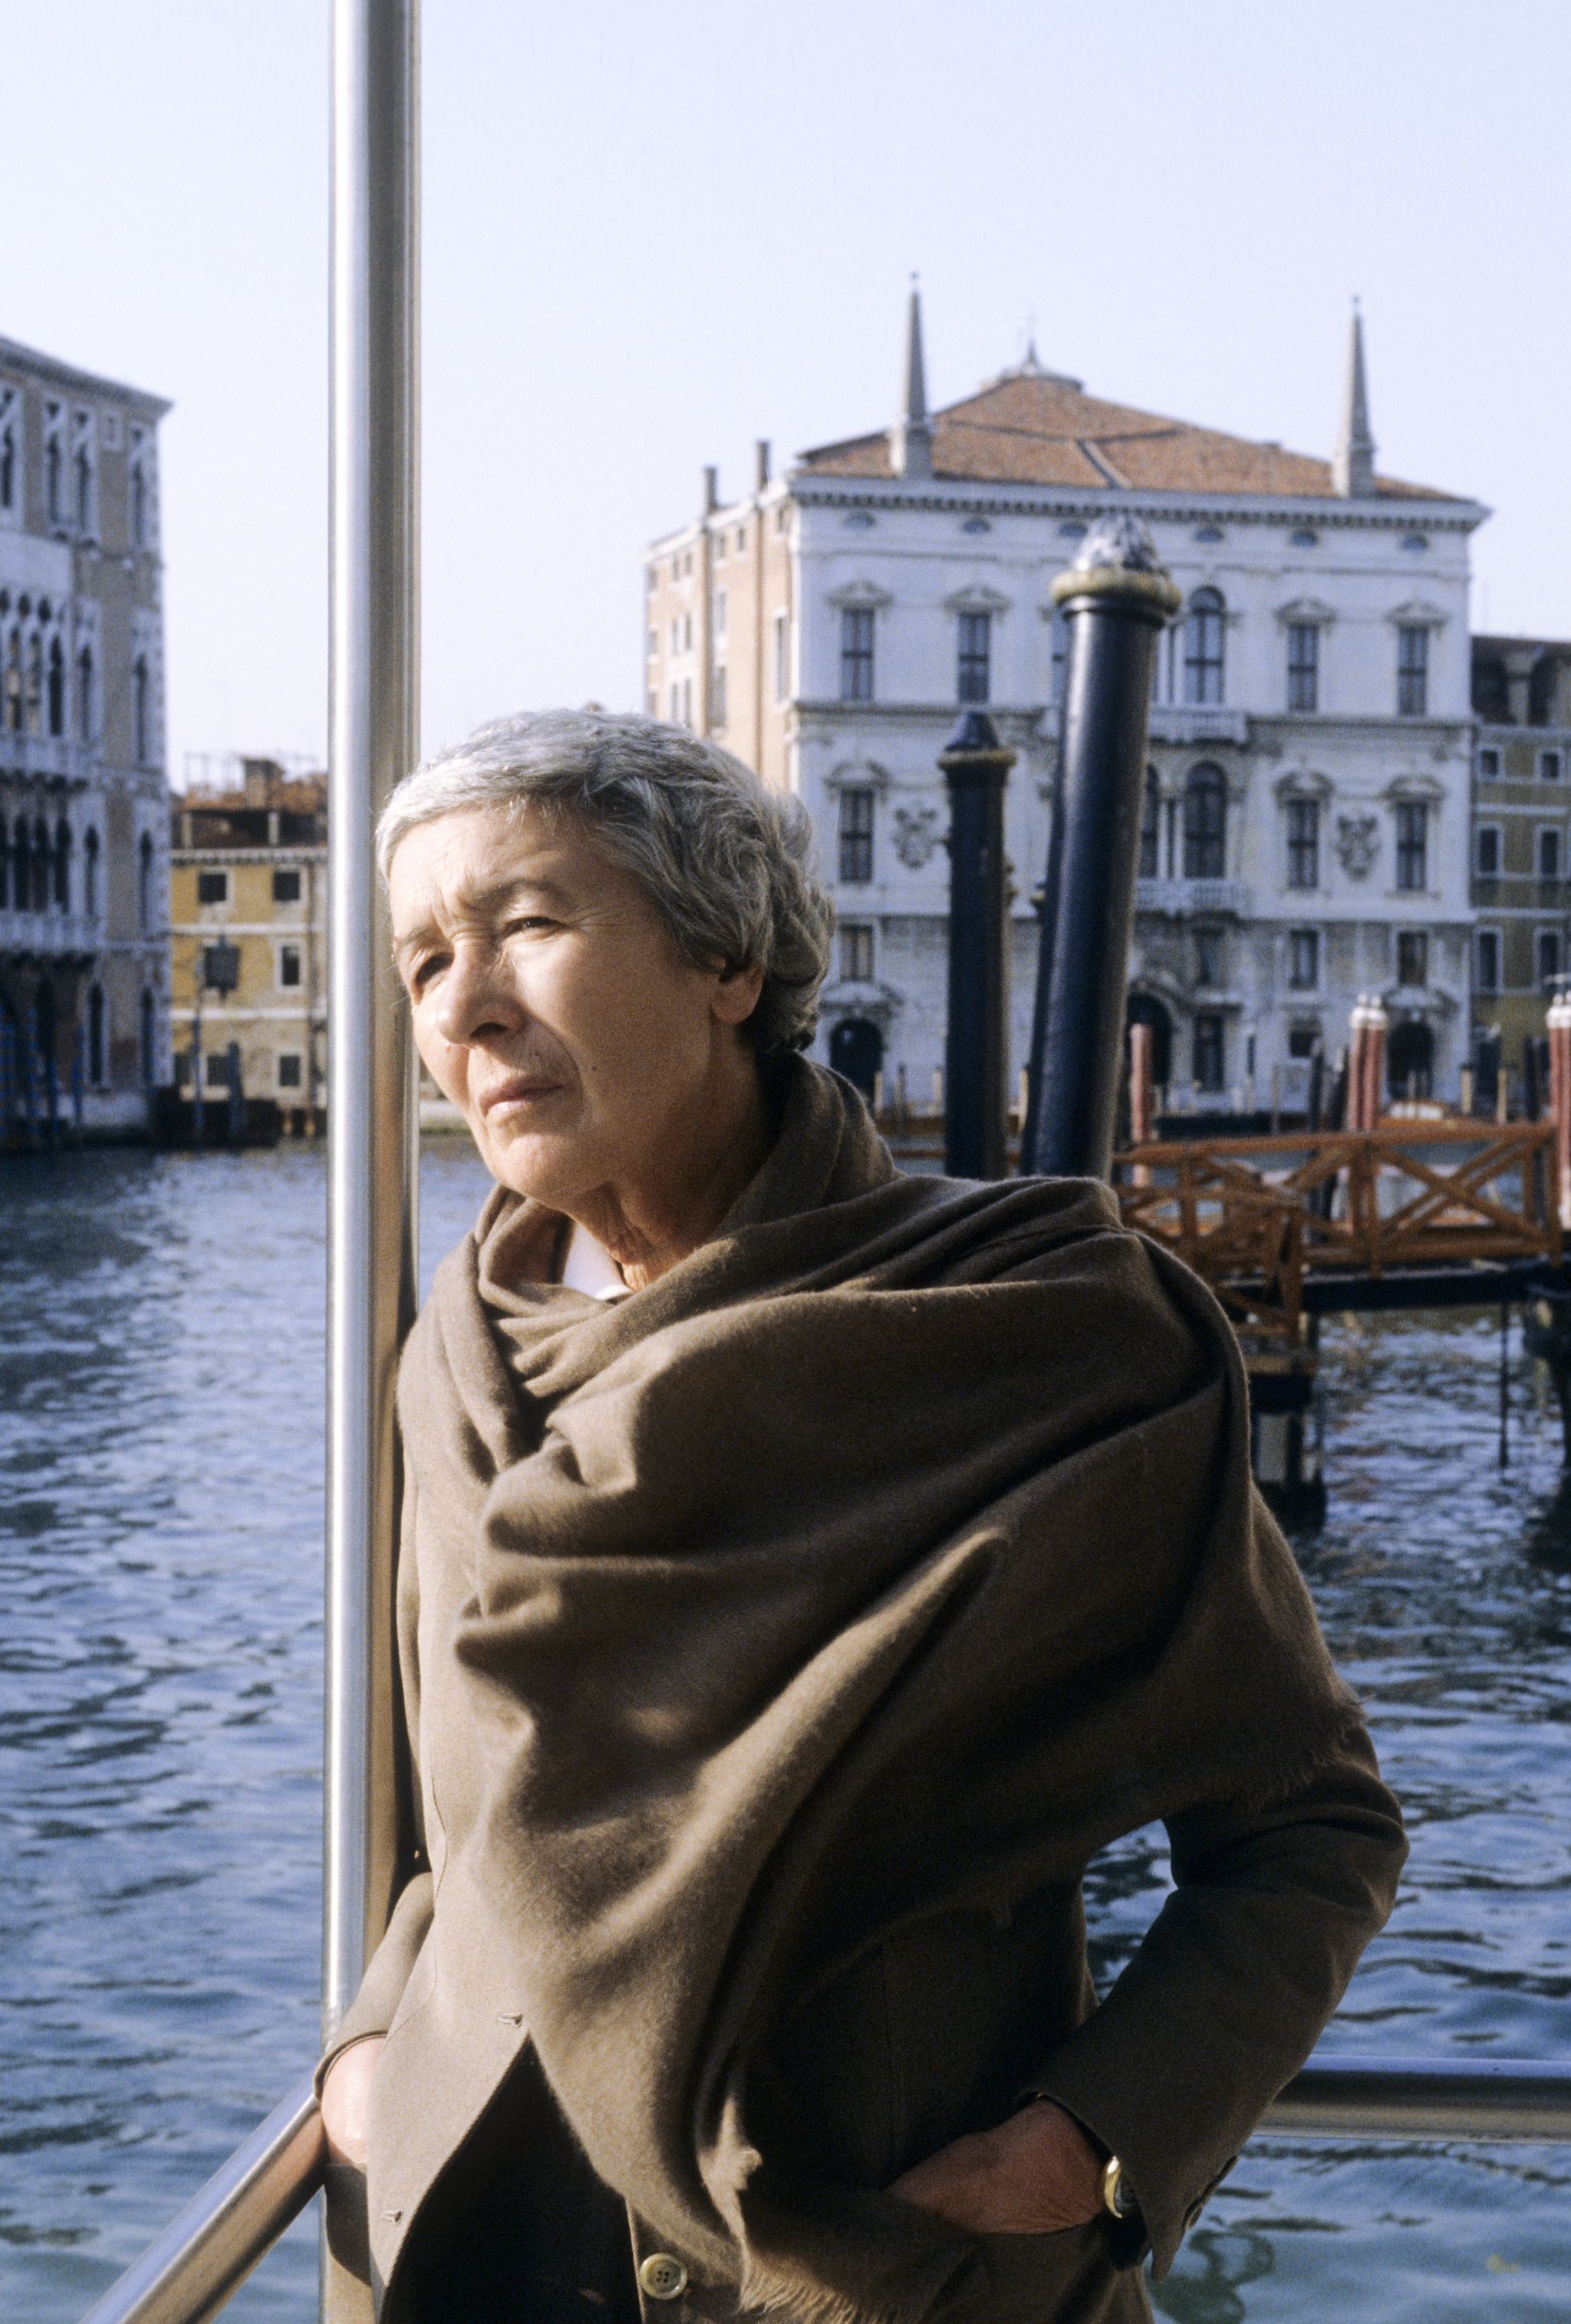 gae aulenti  at palazzo grassi, during the setup of a marcel duchamp's exhibition, venice, 26th march 1993 photo by leonardo cendamogetty images